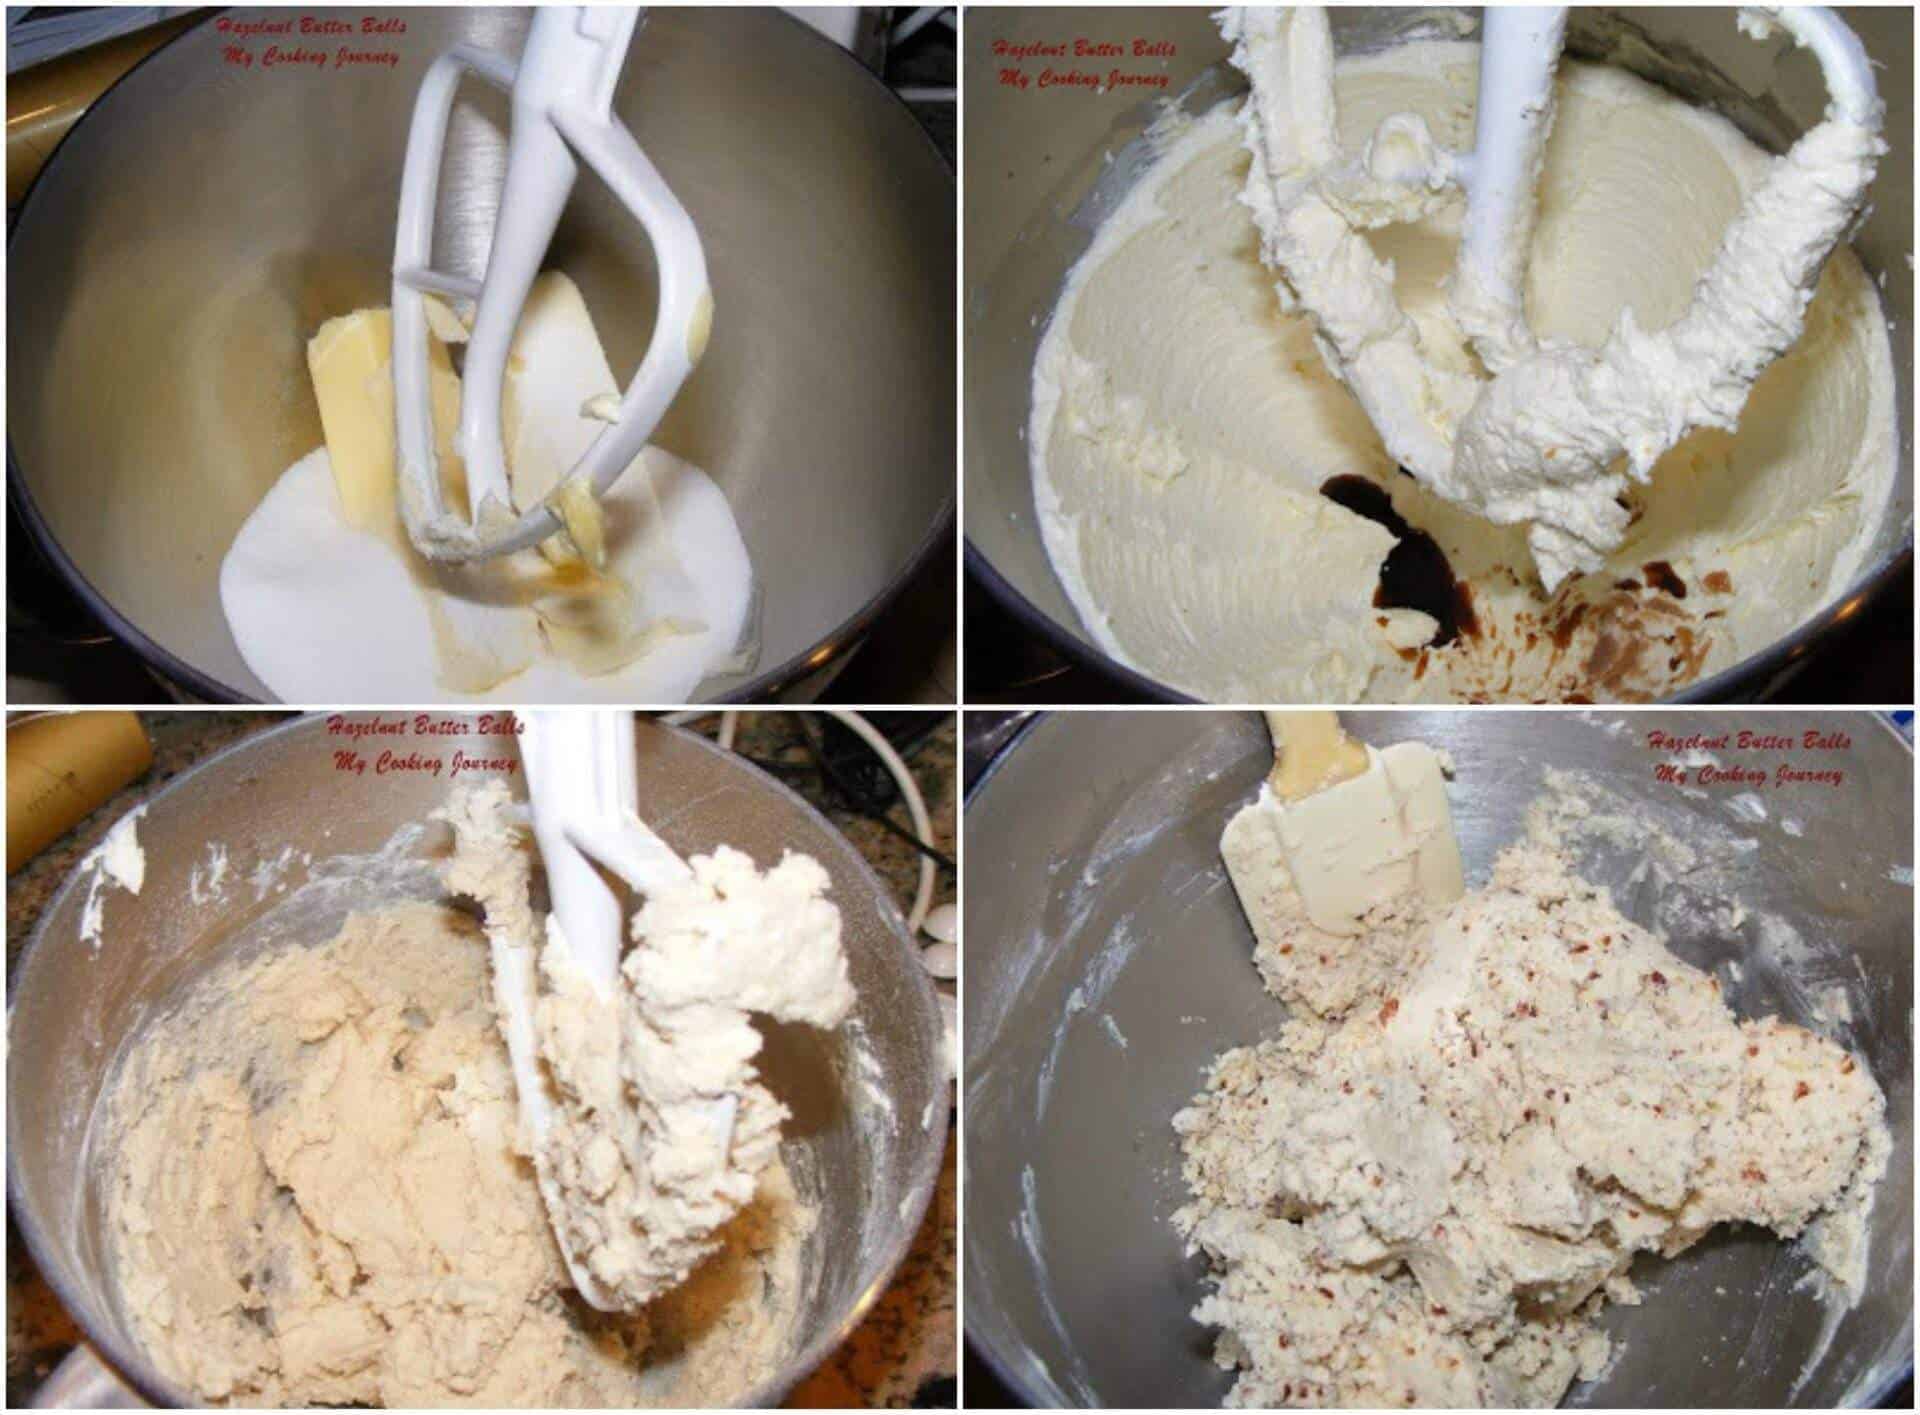 Making cookie dough for Mexican Wedding Cookies